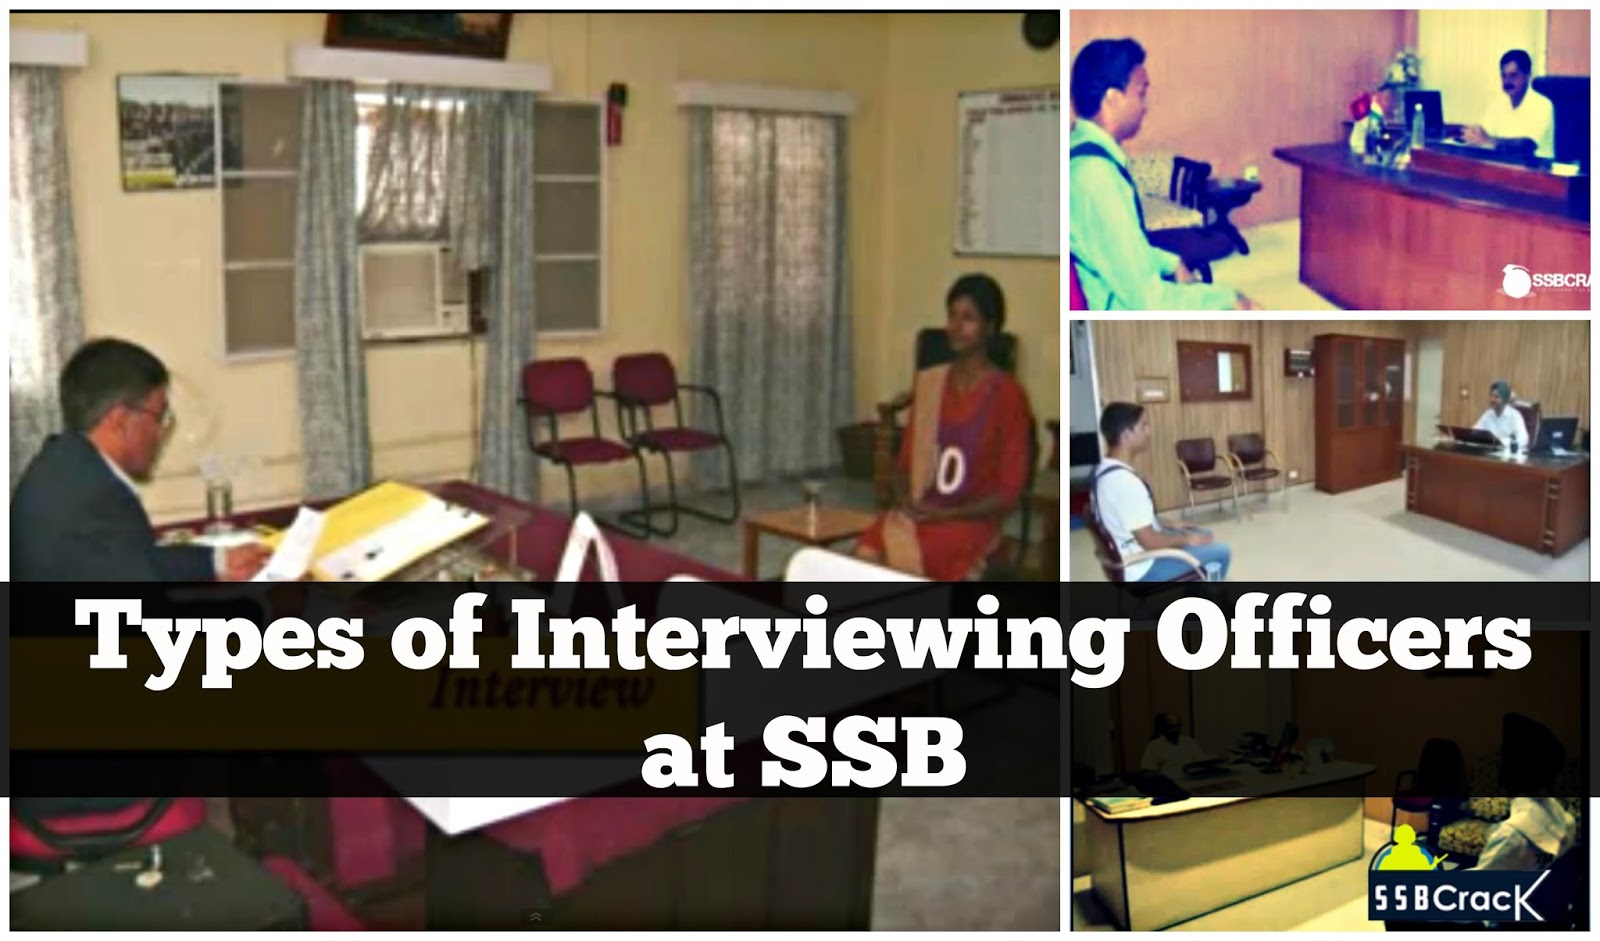 Types of Interviewing Officers at SSB